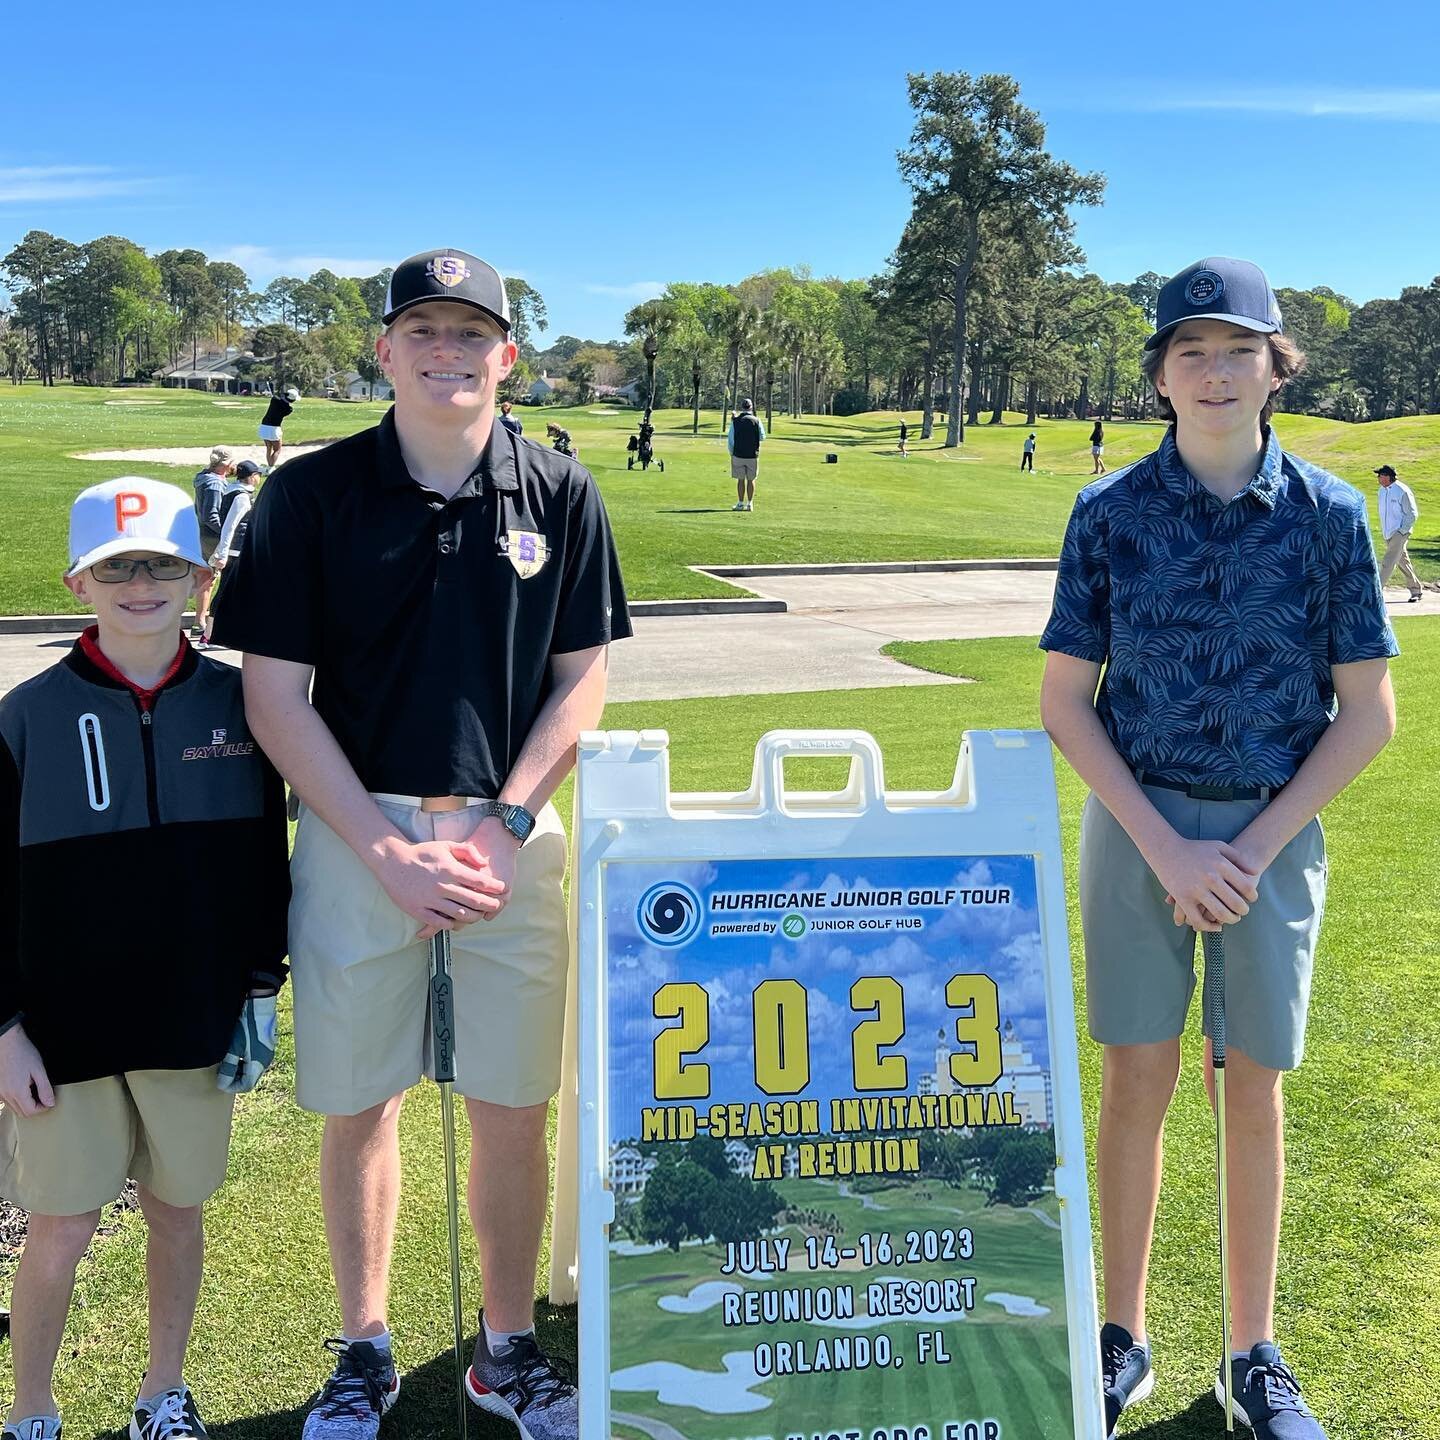 247 Golf Academy travel team players @kaidencap_golf Brody and Cooper Susskind ready to go low in the @hurricanejrgolf tournament in Hilton Head, SC. Good luck boys! 

#golftravelteams #247golf #hjgt